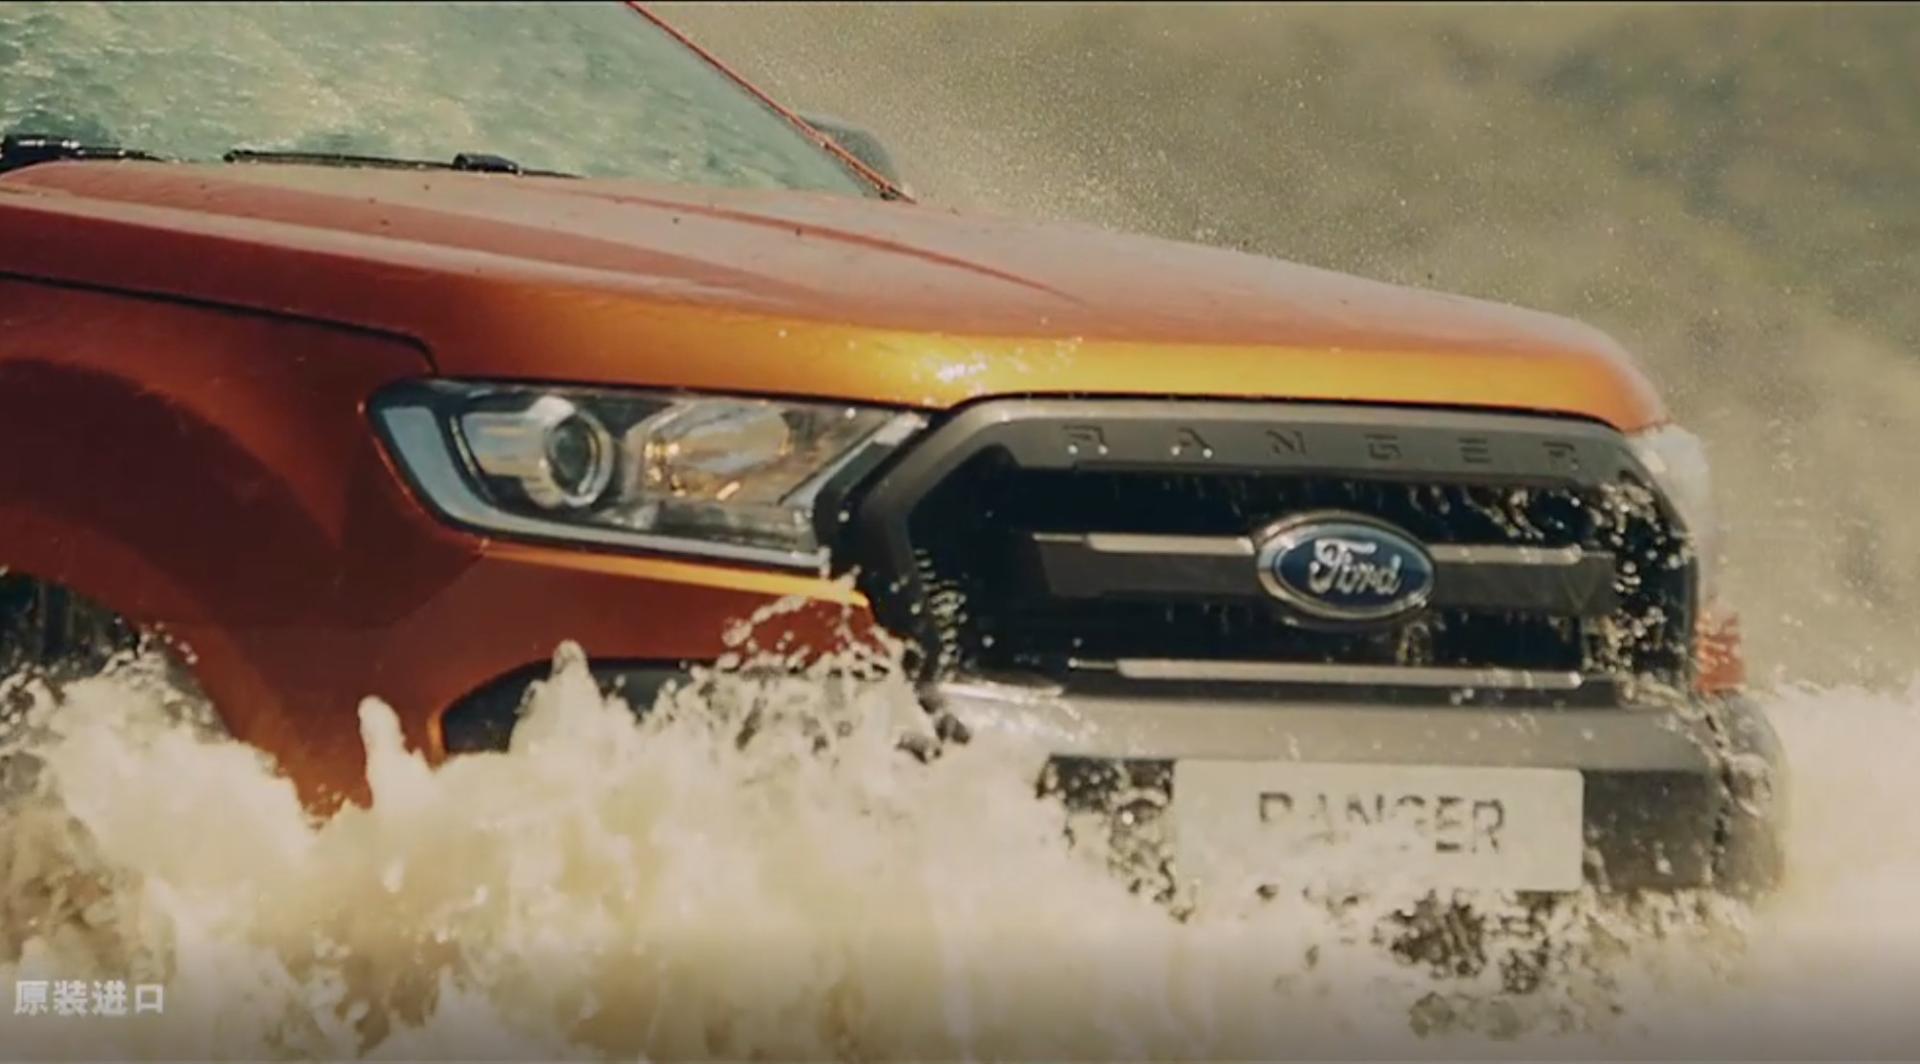 Ford ranger Launch video